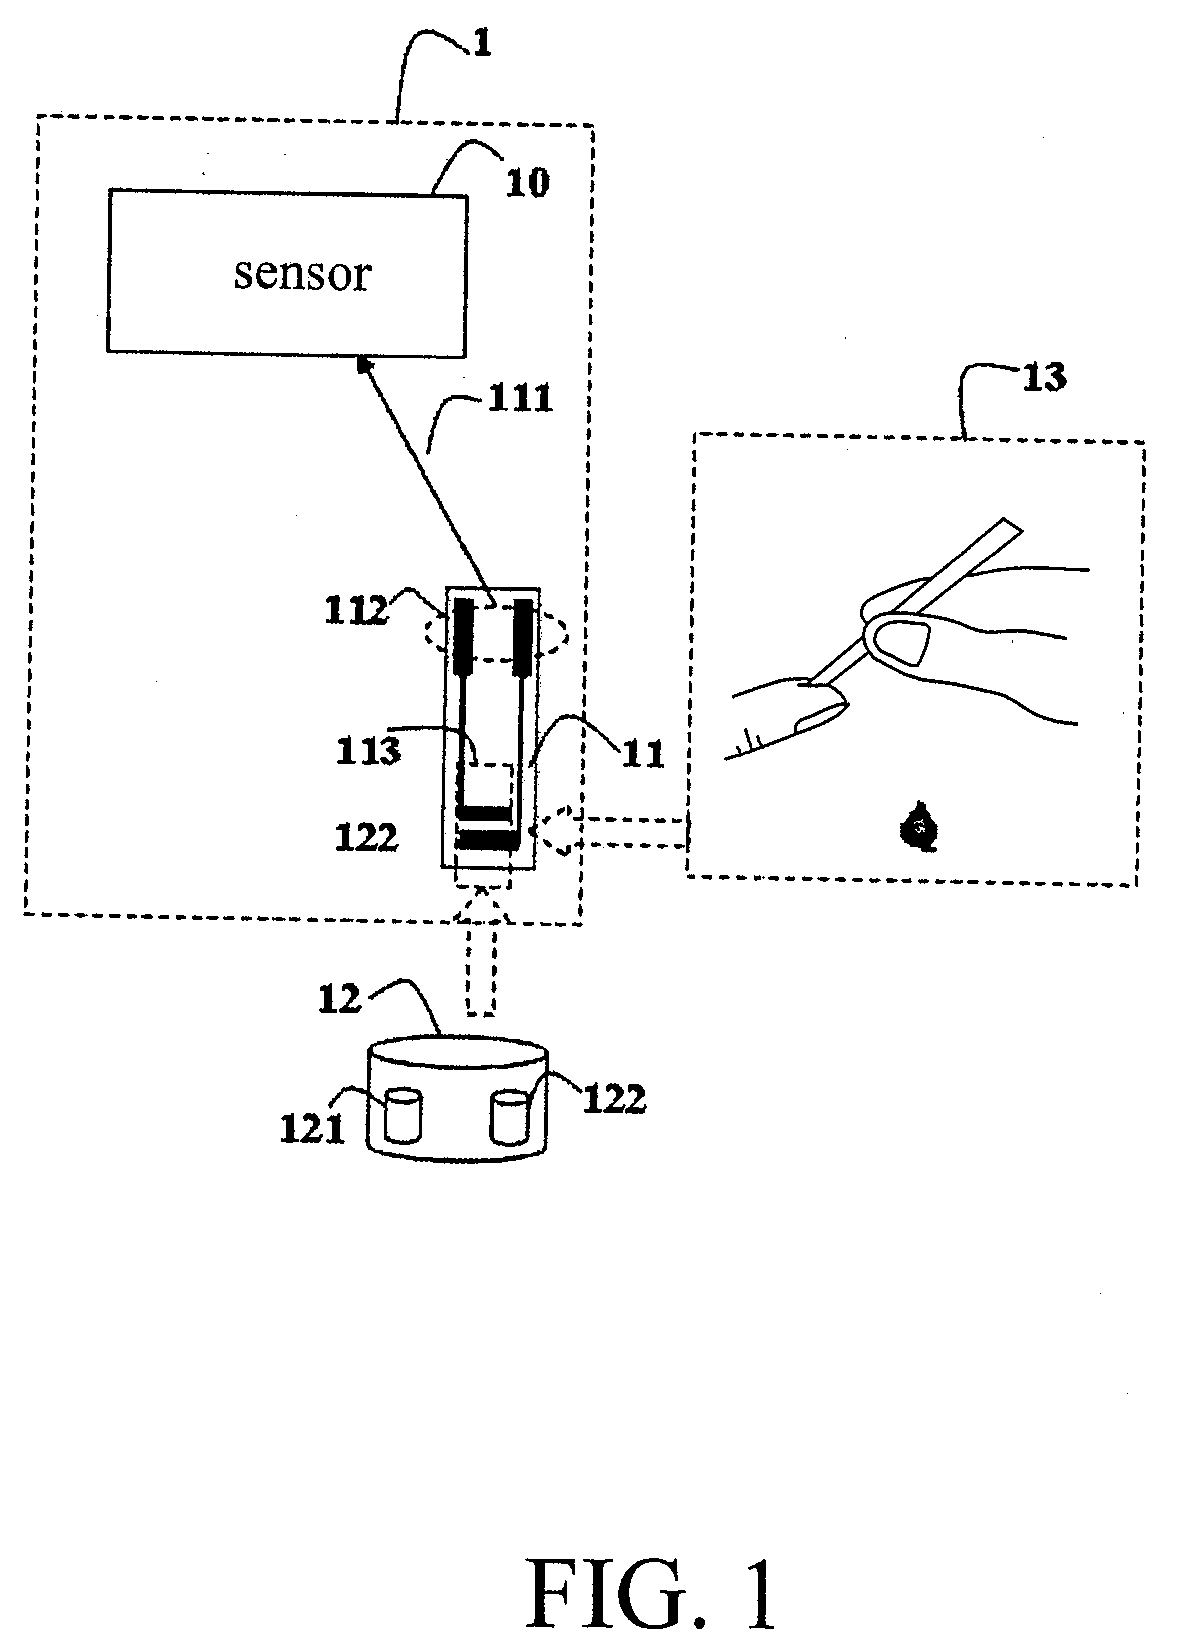 Biosensor, Biostrip, and Manufacture Method of Determination of Uric Acid by a Non-Enzymatic Reagent